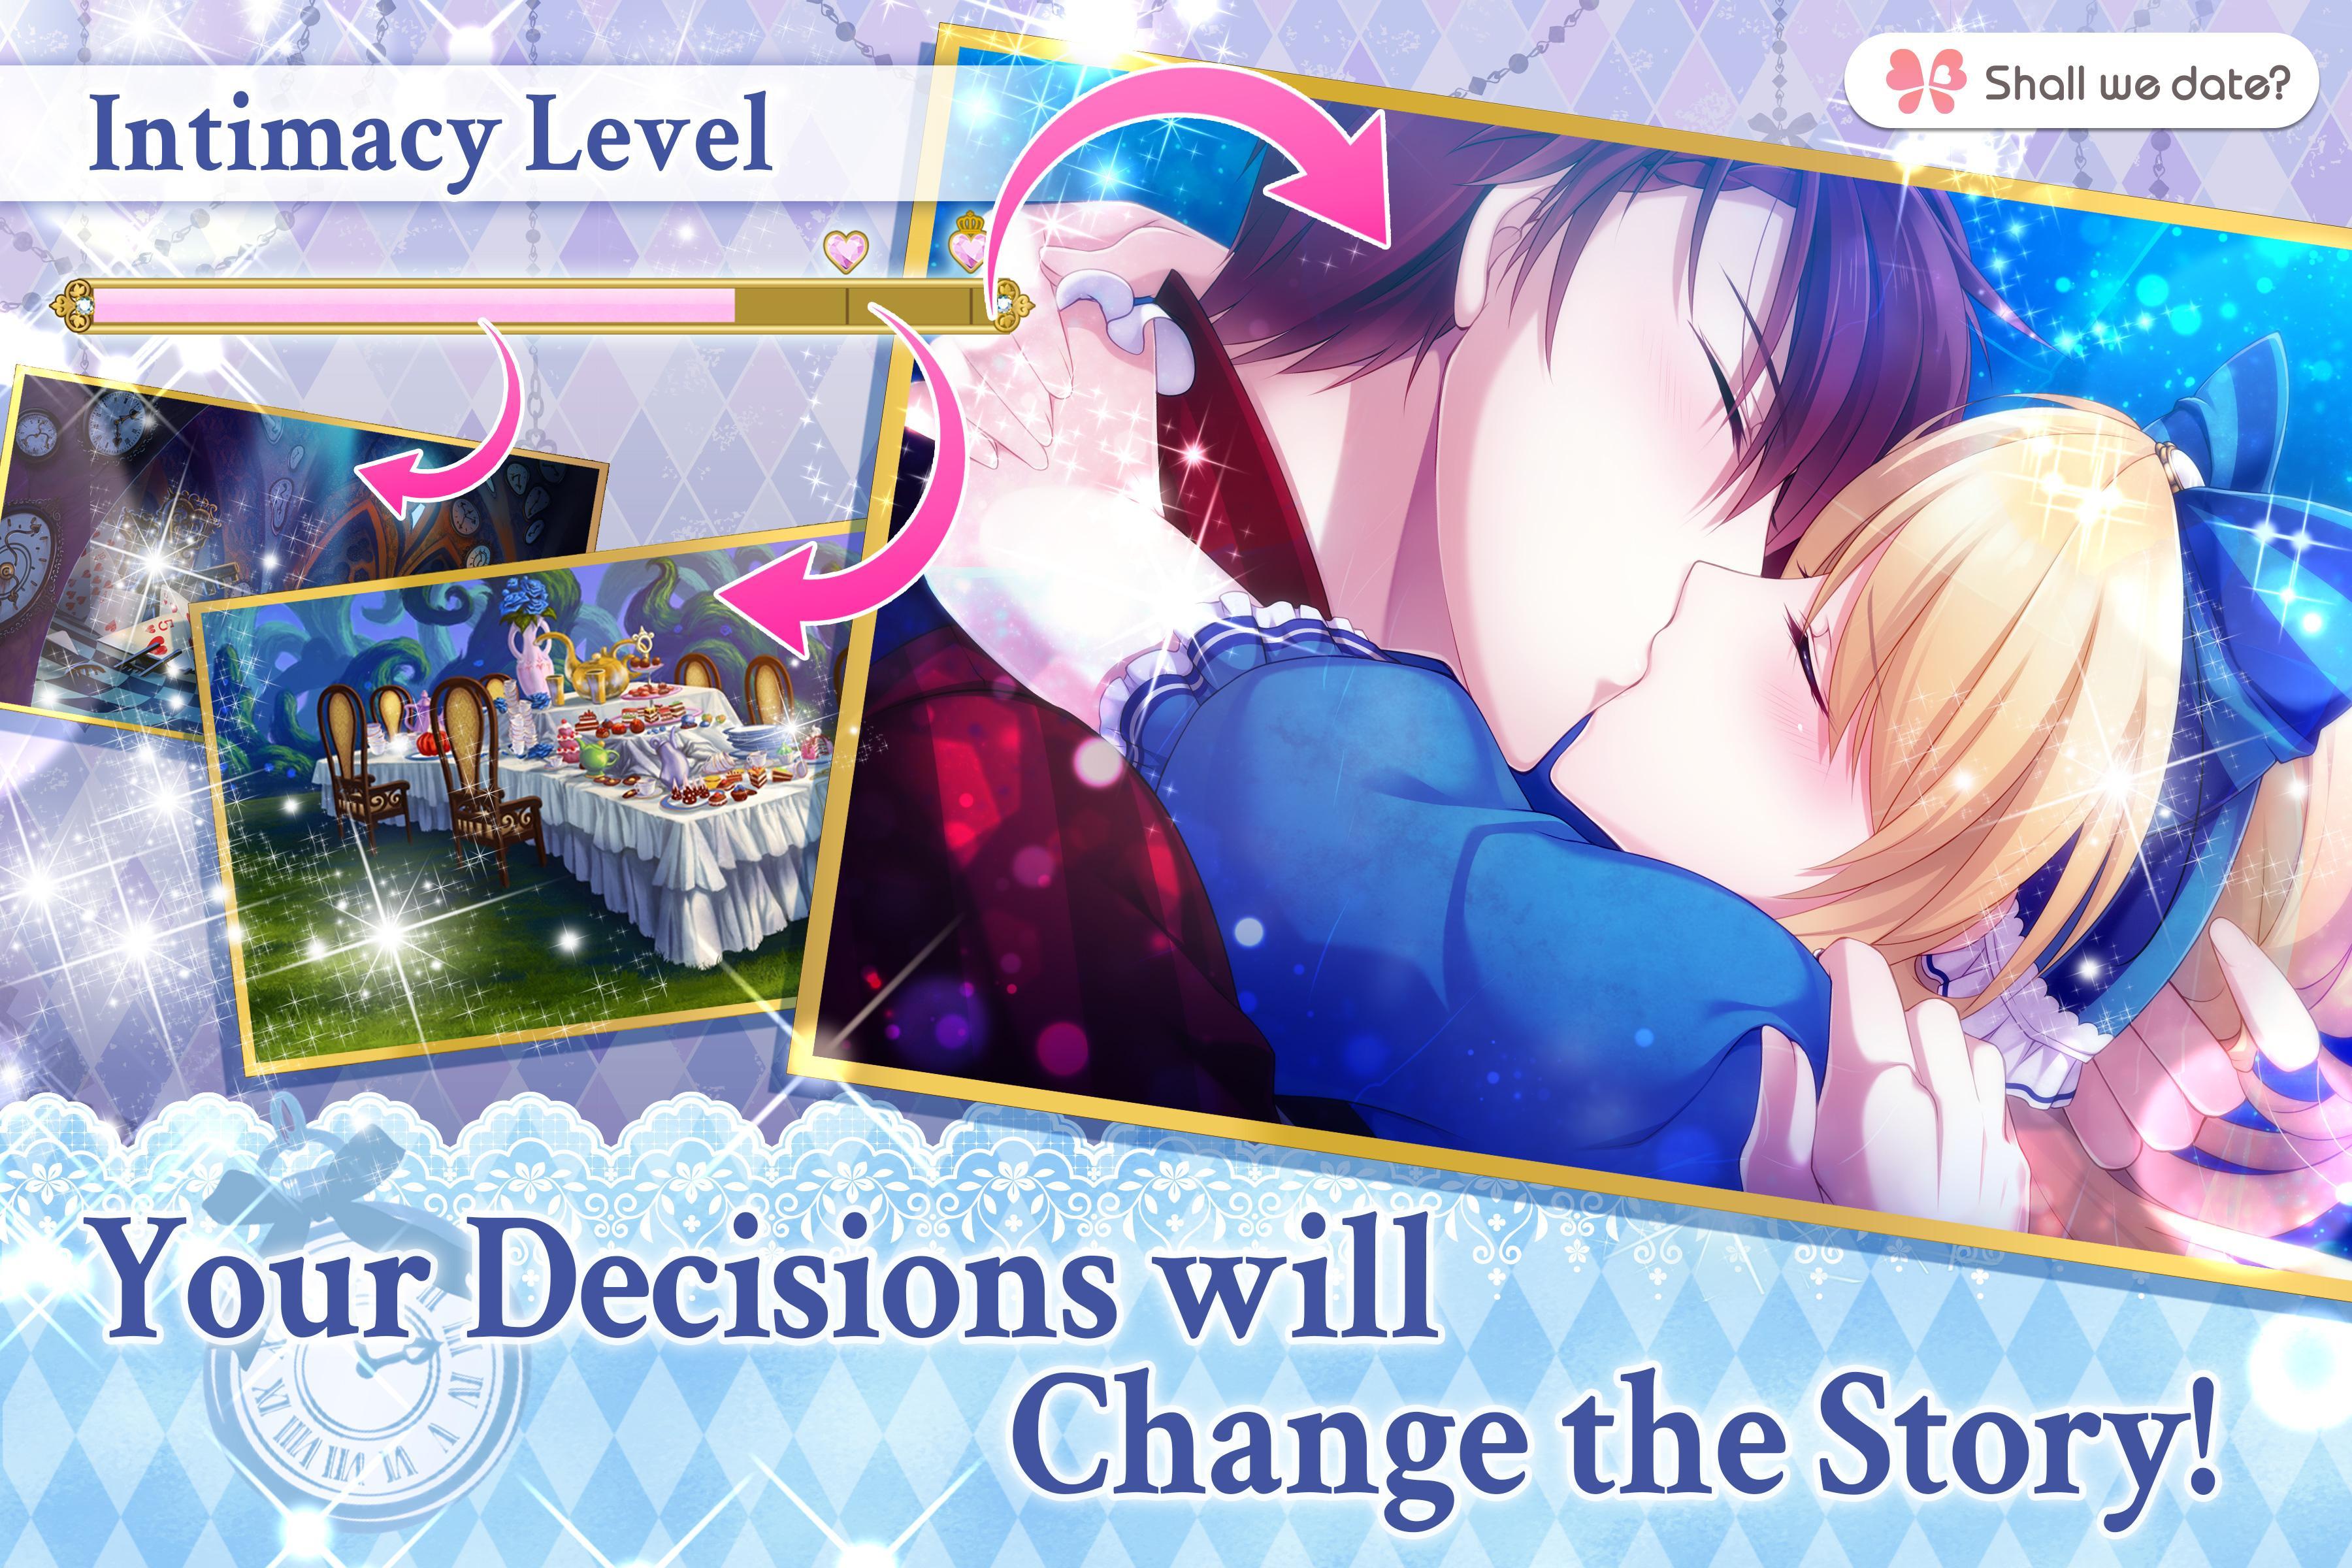 Lost Alice - otome game/dating sim #shall we date 1.5.1 Screenshot 4